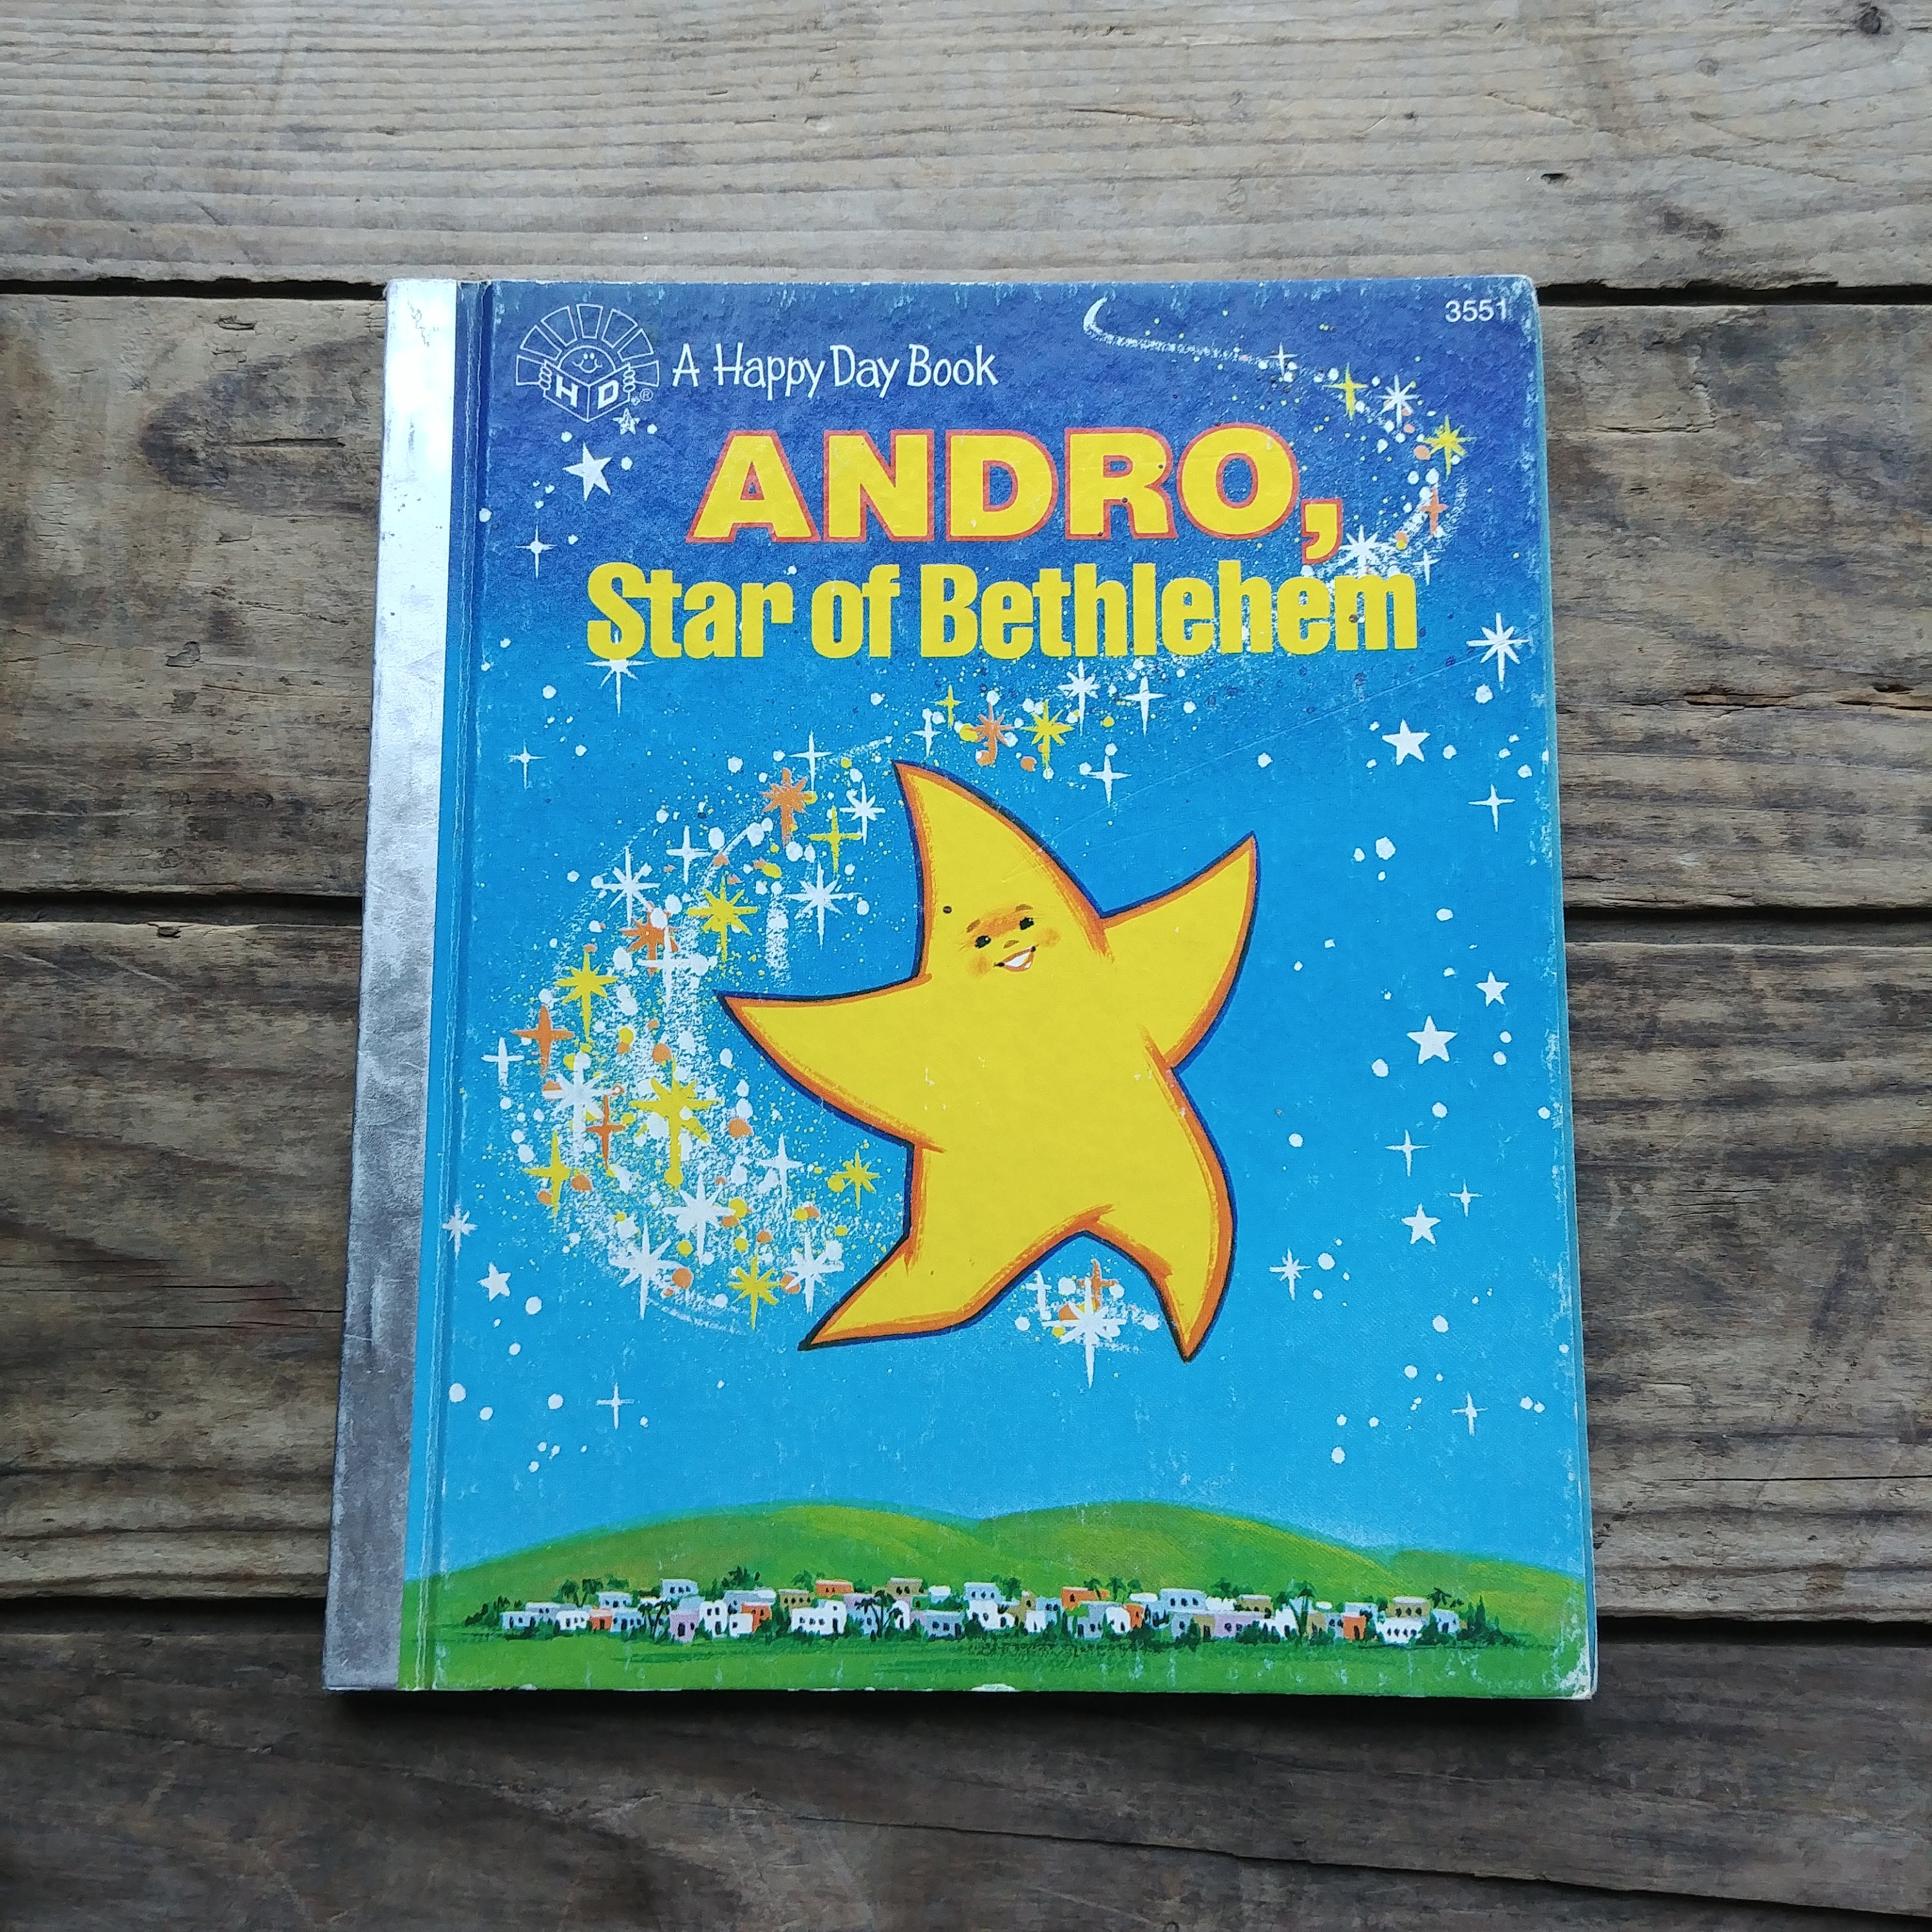 Andro Star of Bethlehem A Happy Day Book Vintage